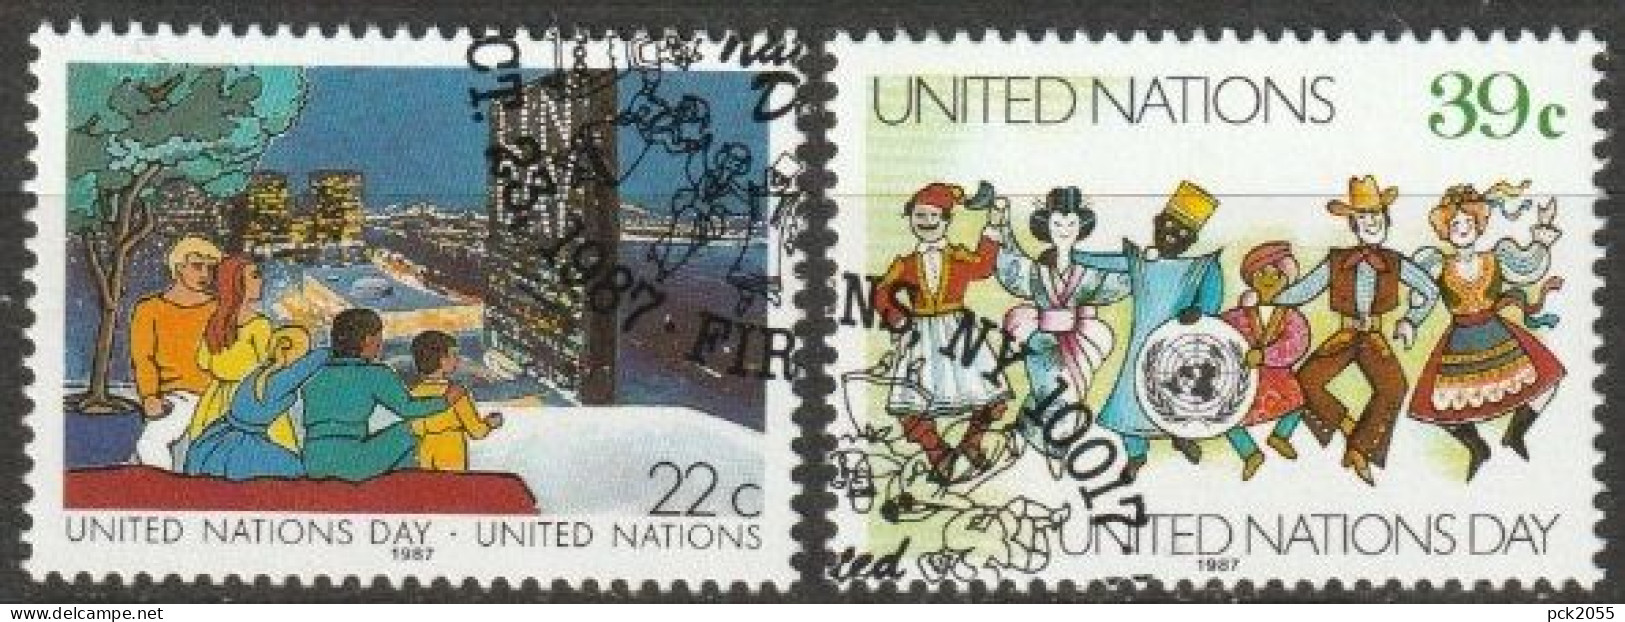 UNO New York 1987 MiNr.540 - 541 O Gestempelt Tag Der UNO ( 5560)Versand 1,00€-1,20€ - Used Stamps